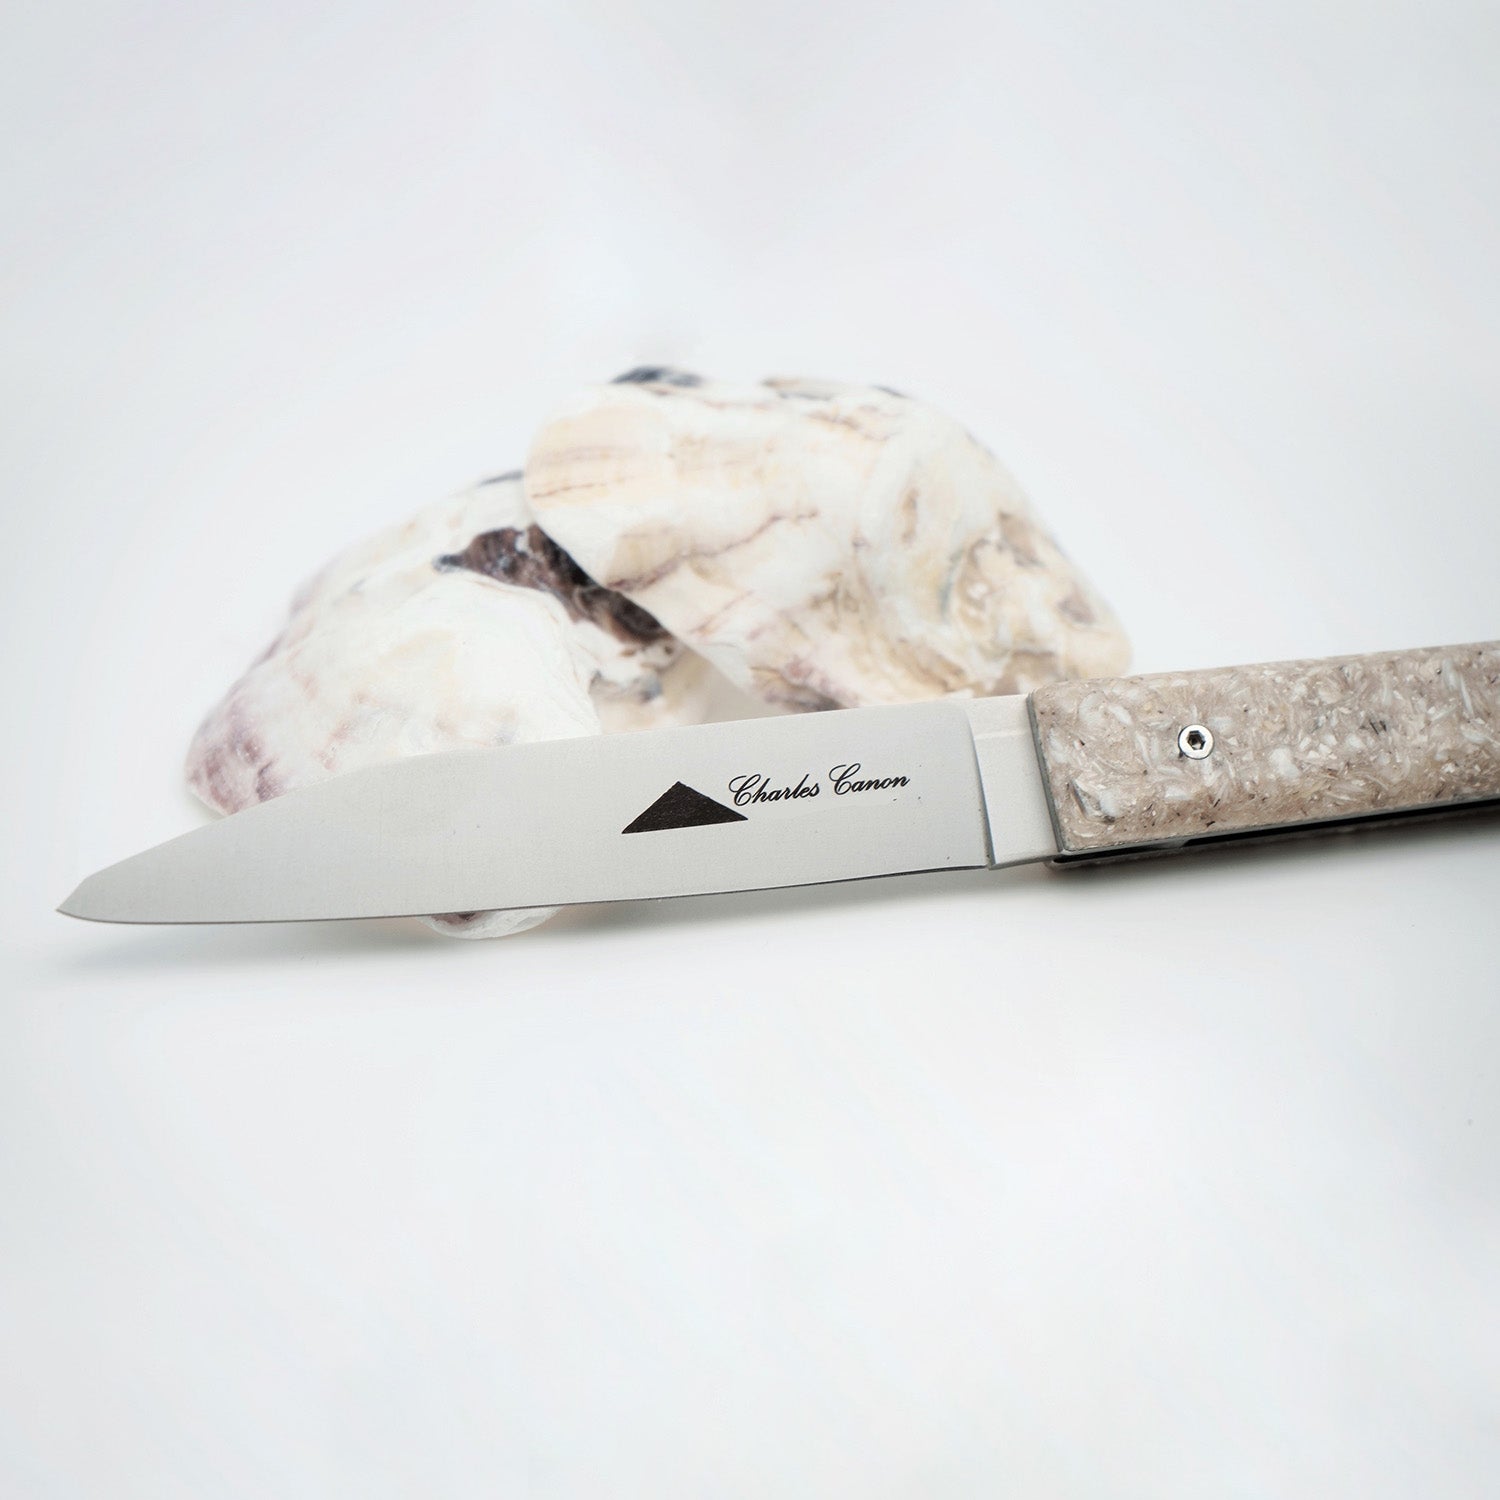 Knife handle made from recycled oyster shells